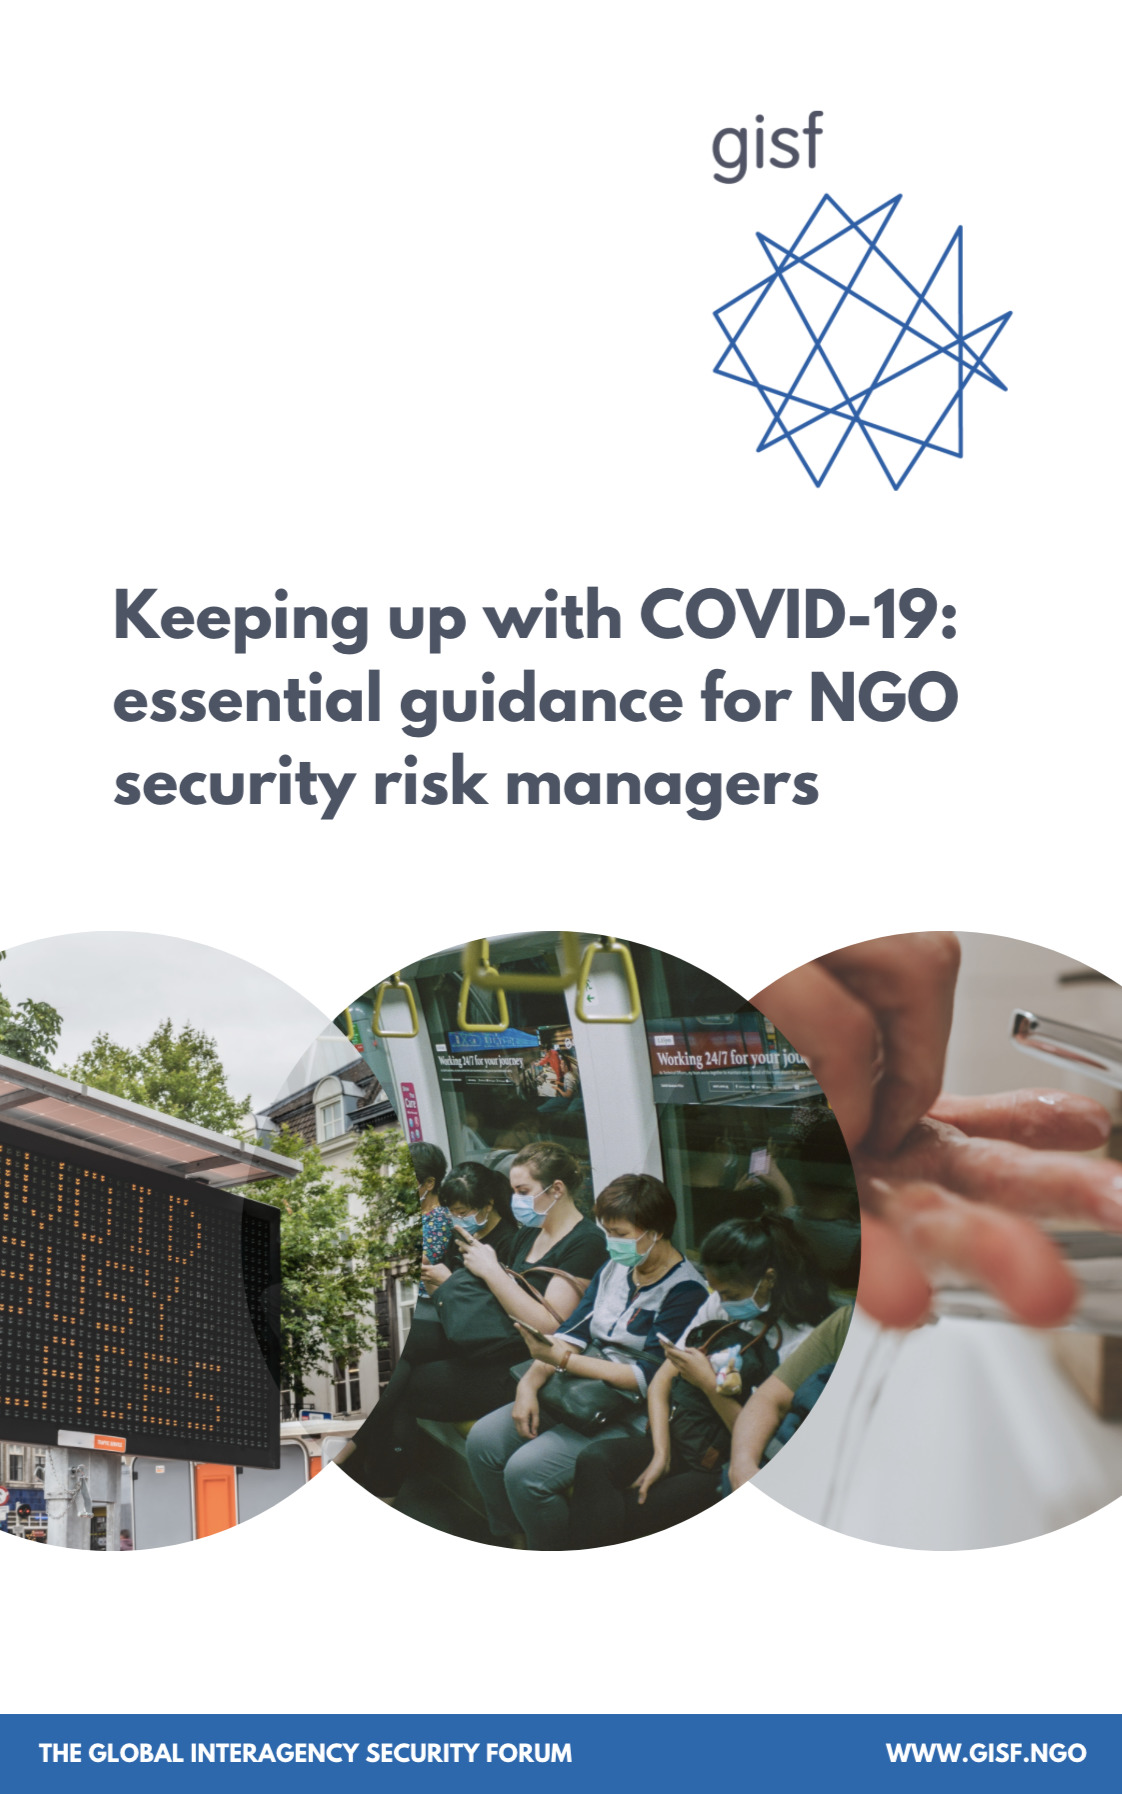 Keeping up with COVID-19: essential guidance for NGO security risk managers